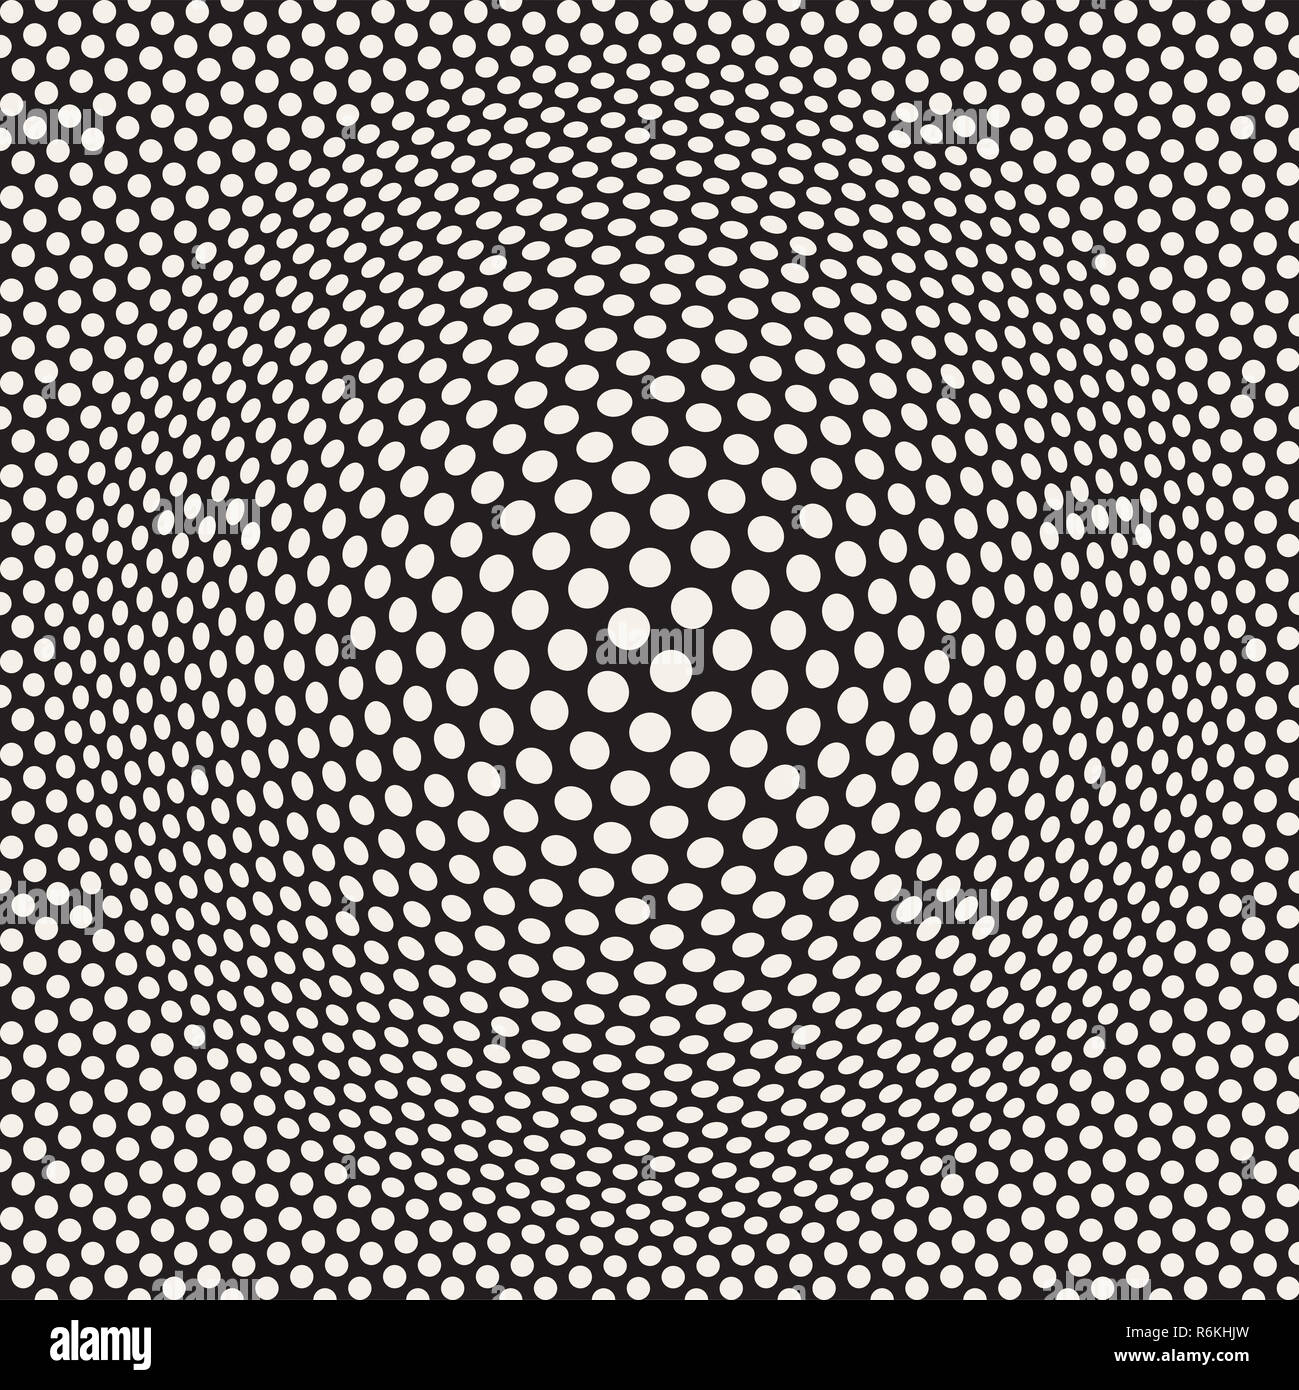 Halftone bloat effect optical illusion. Abstract geometric background design. Vector seamless retro pattern. Stock Photo